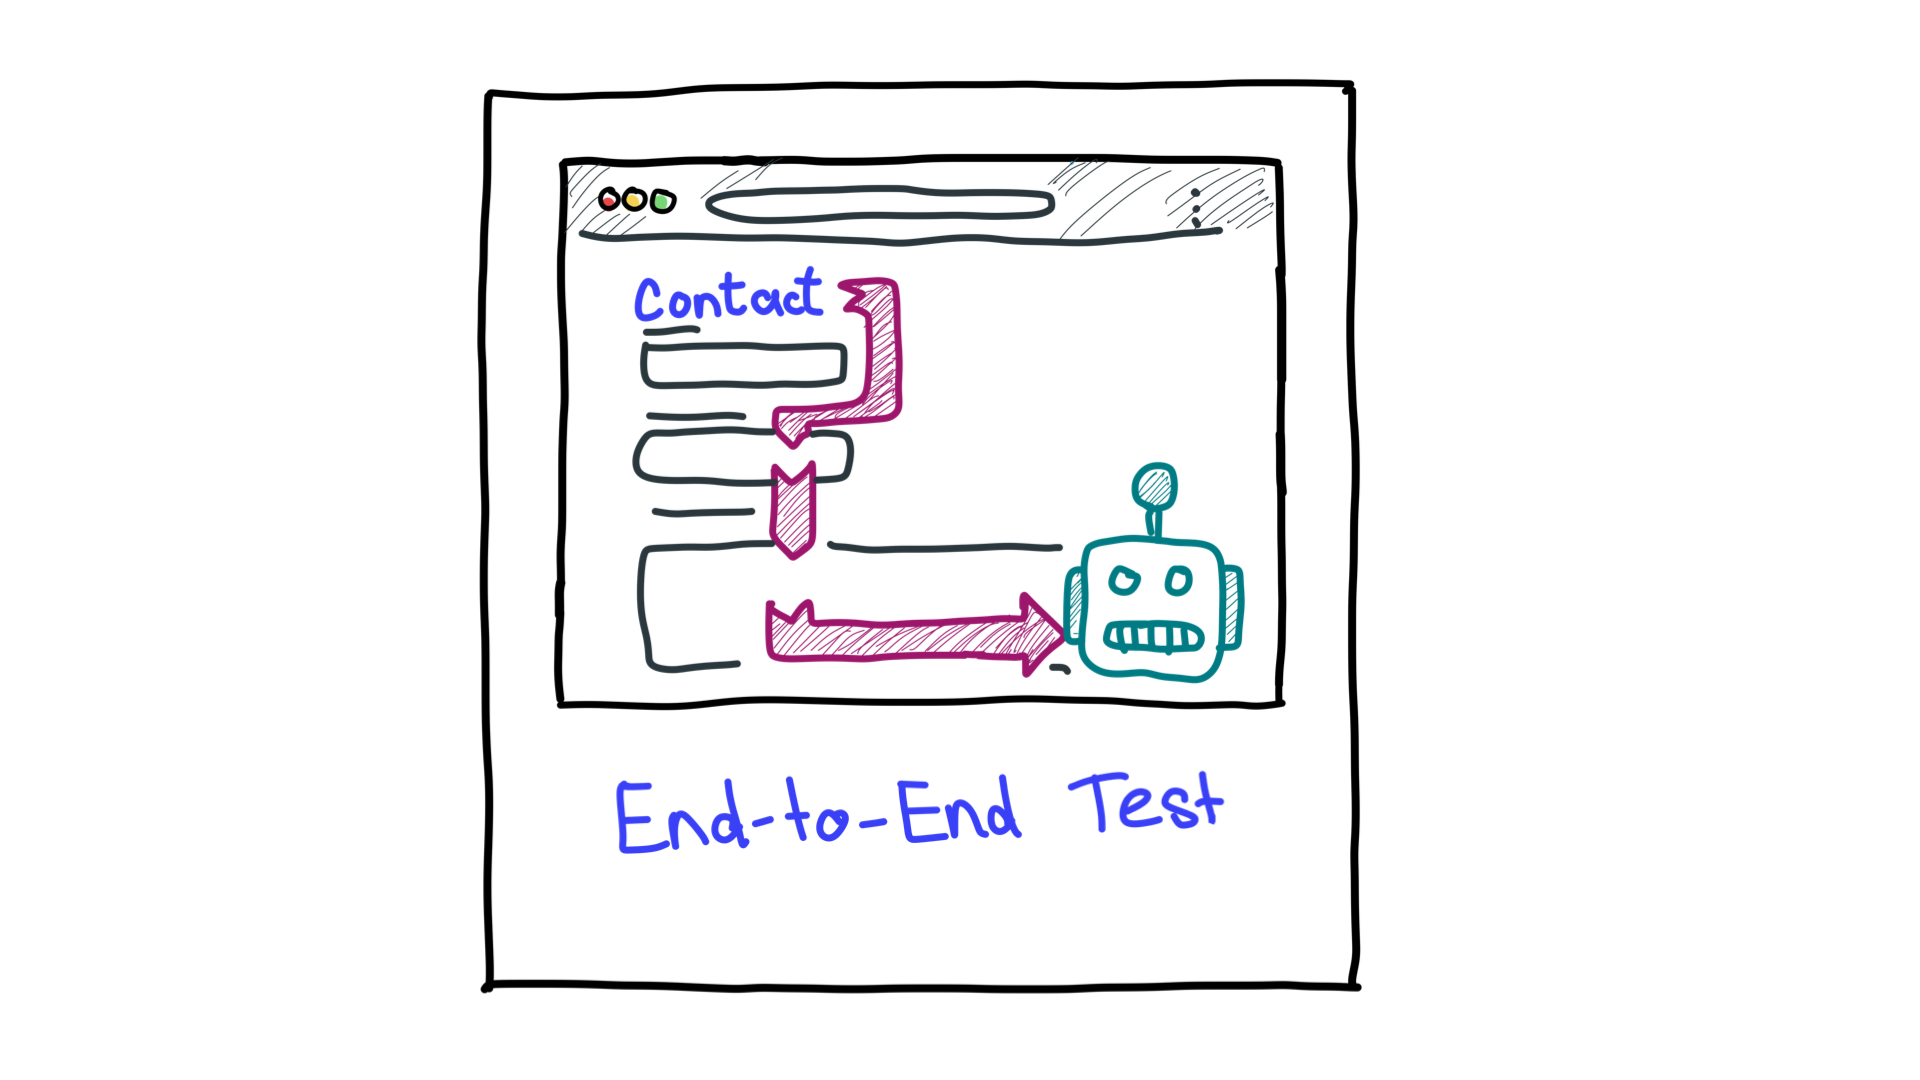 A simplified depiction of end-to-end testing showing a computer as a robot, looking at a workflow.